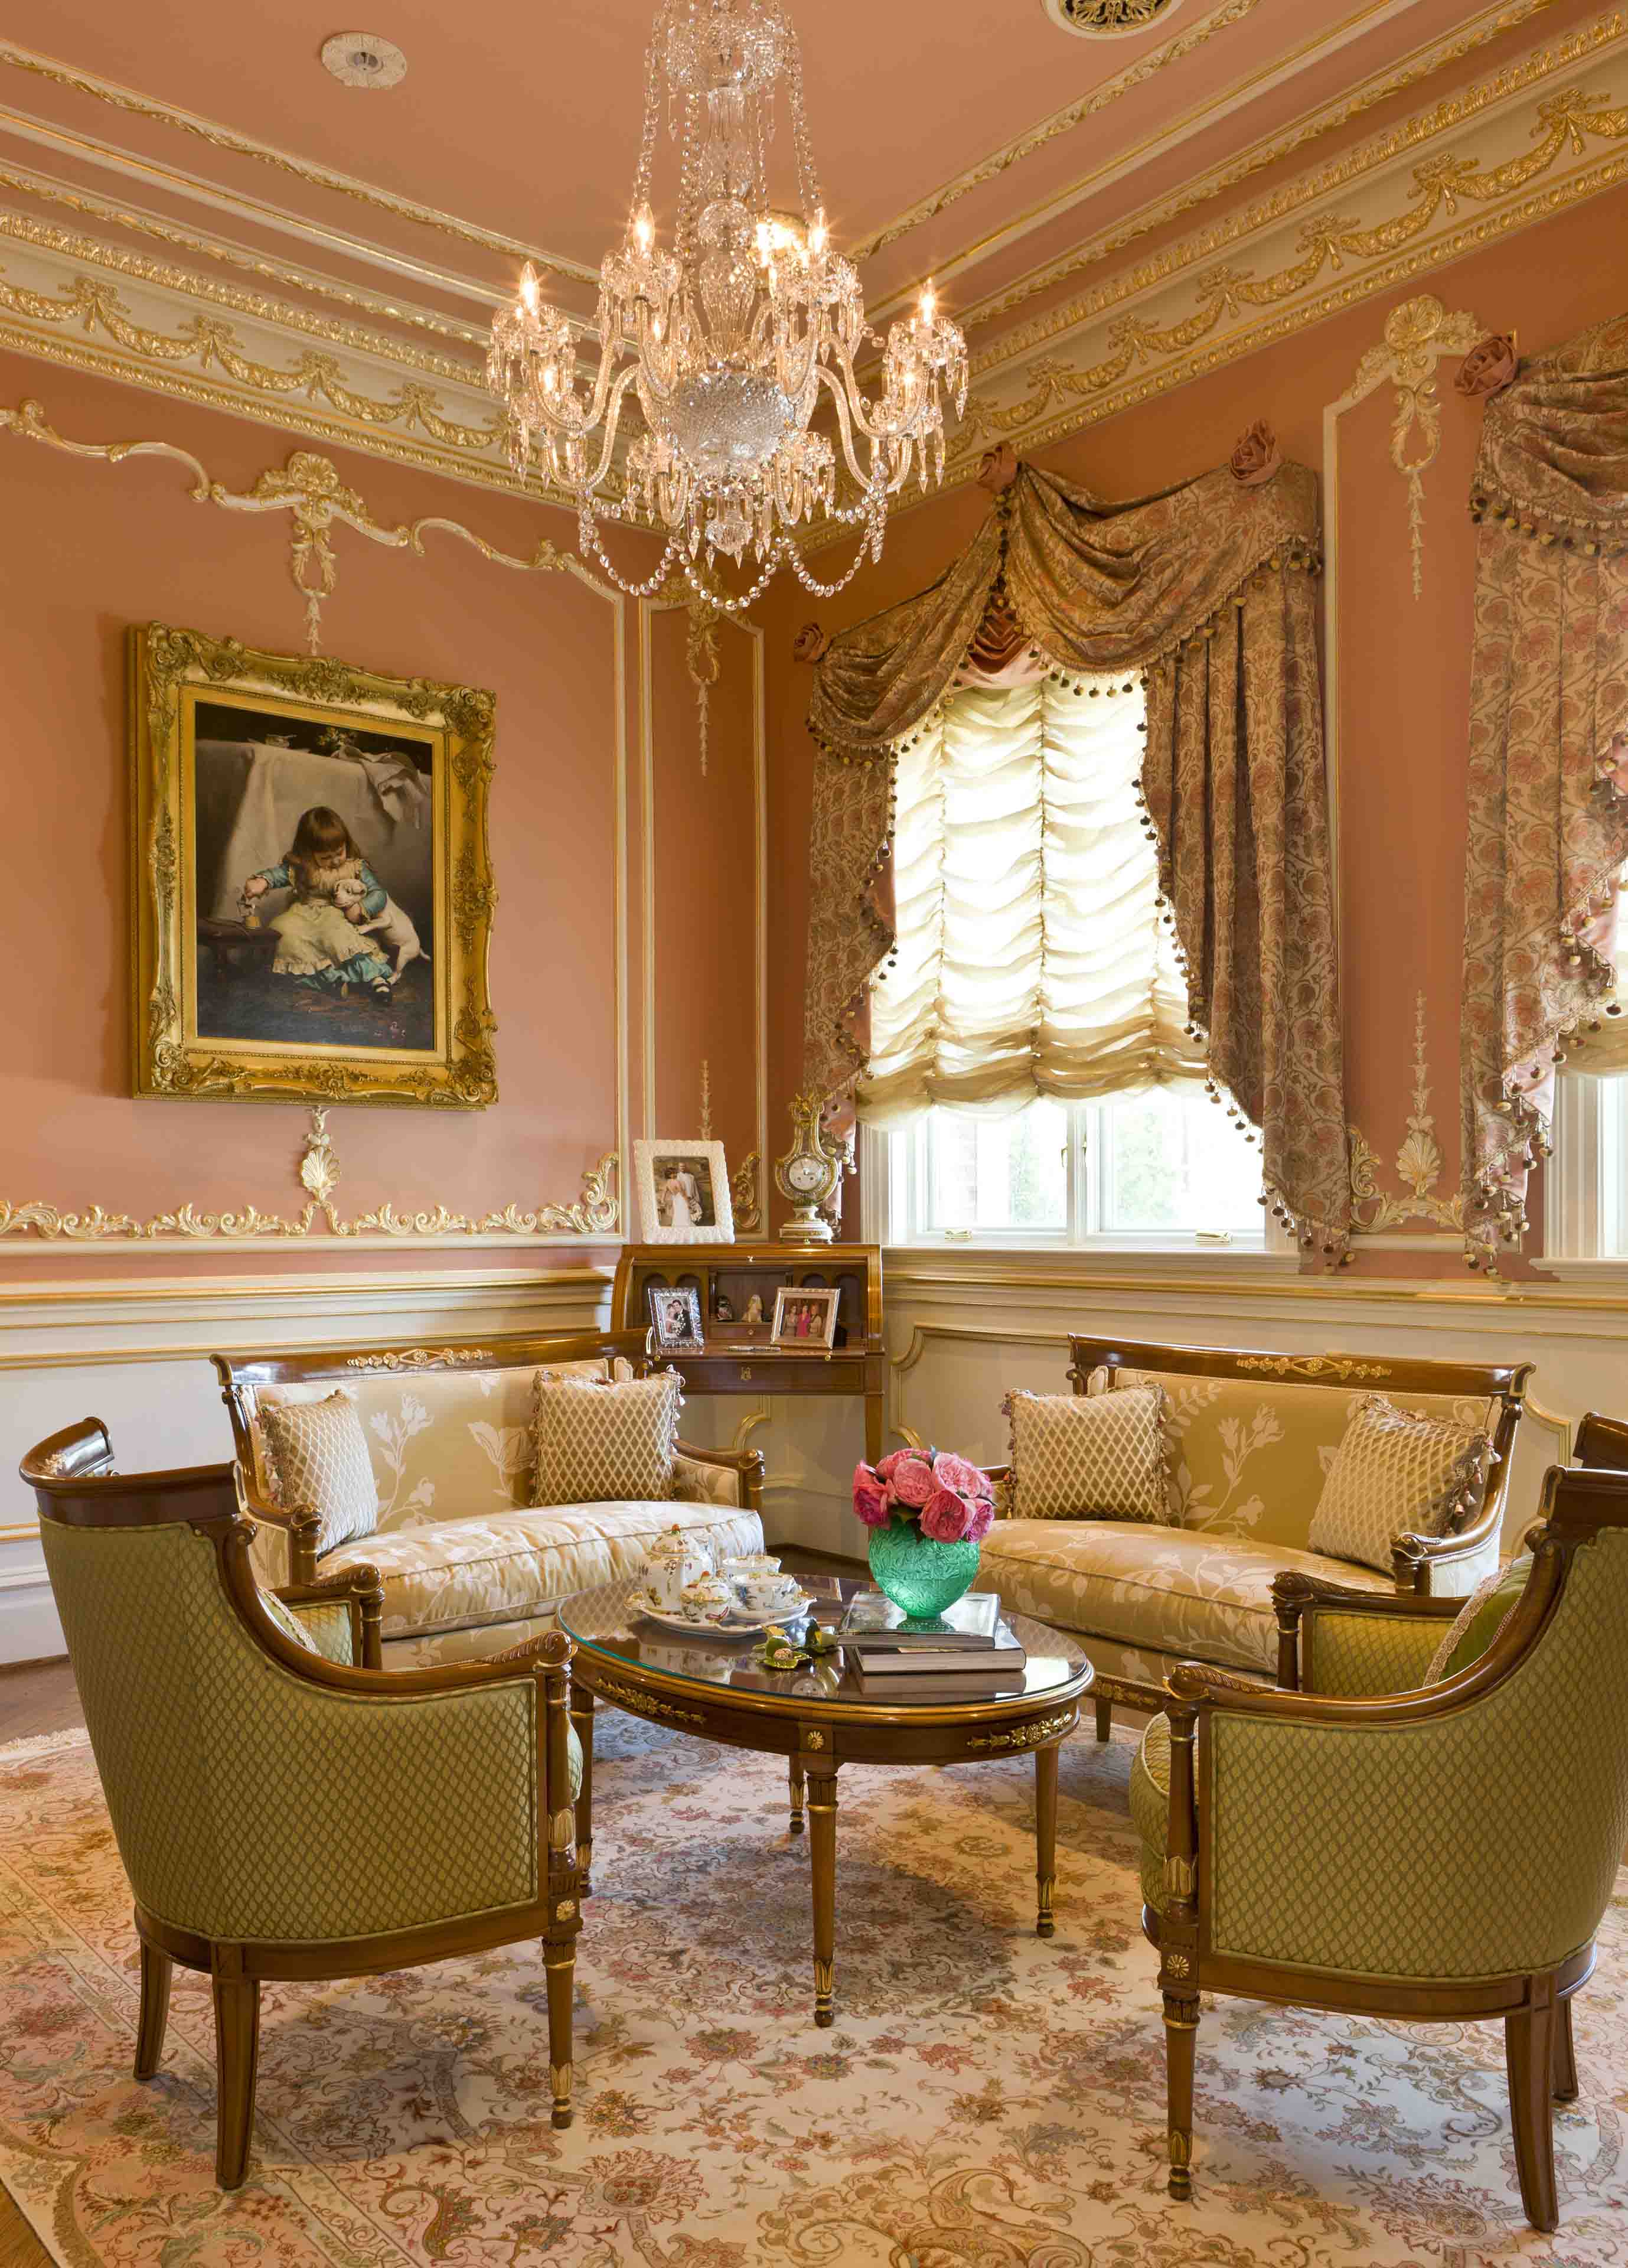 Tea room with classical furniture, custom pink walls and gold crown moldings